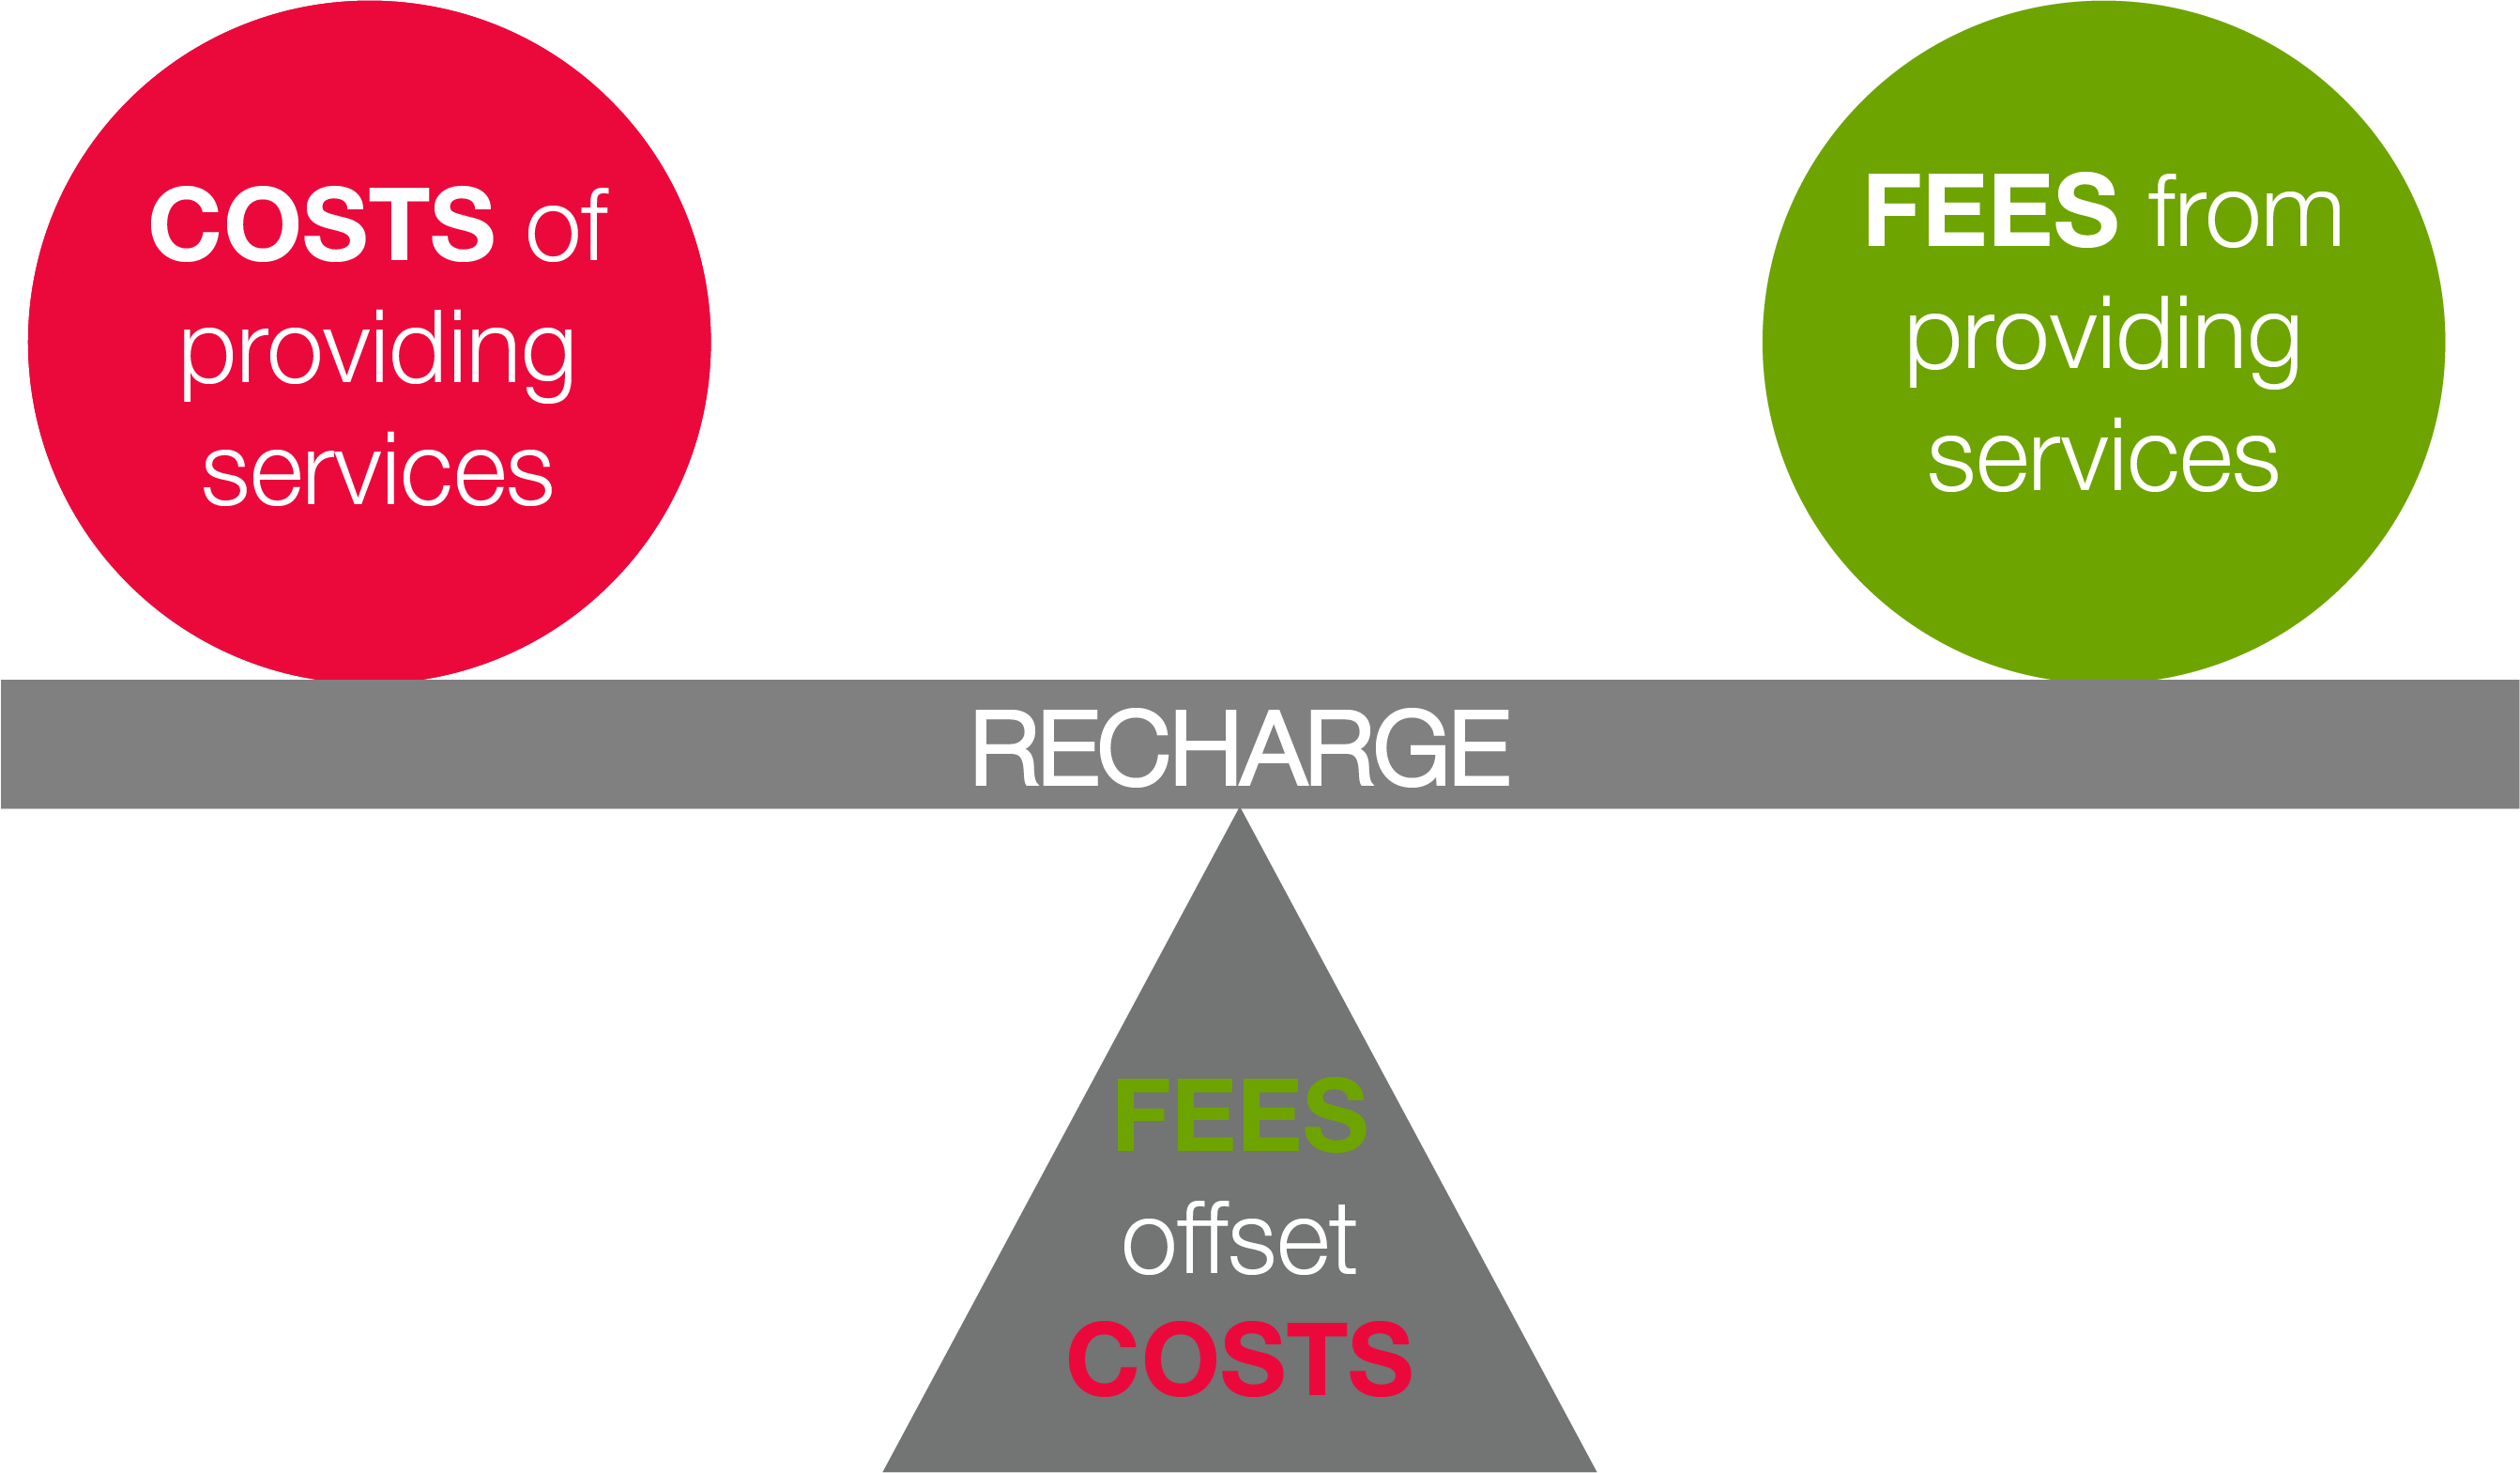 A recharge is an internal charging mechanism where the costs of  providing products or services are recovered by charging fees based on an approved recharge rate.